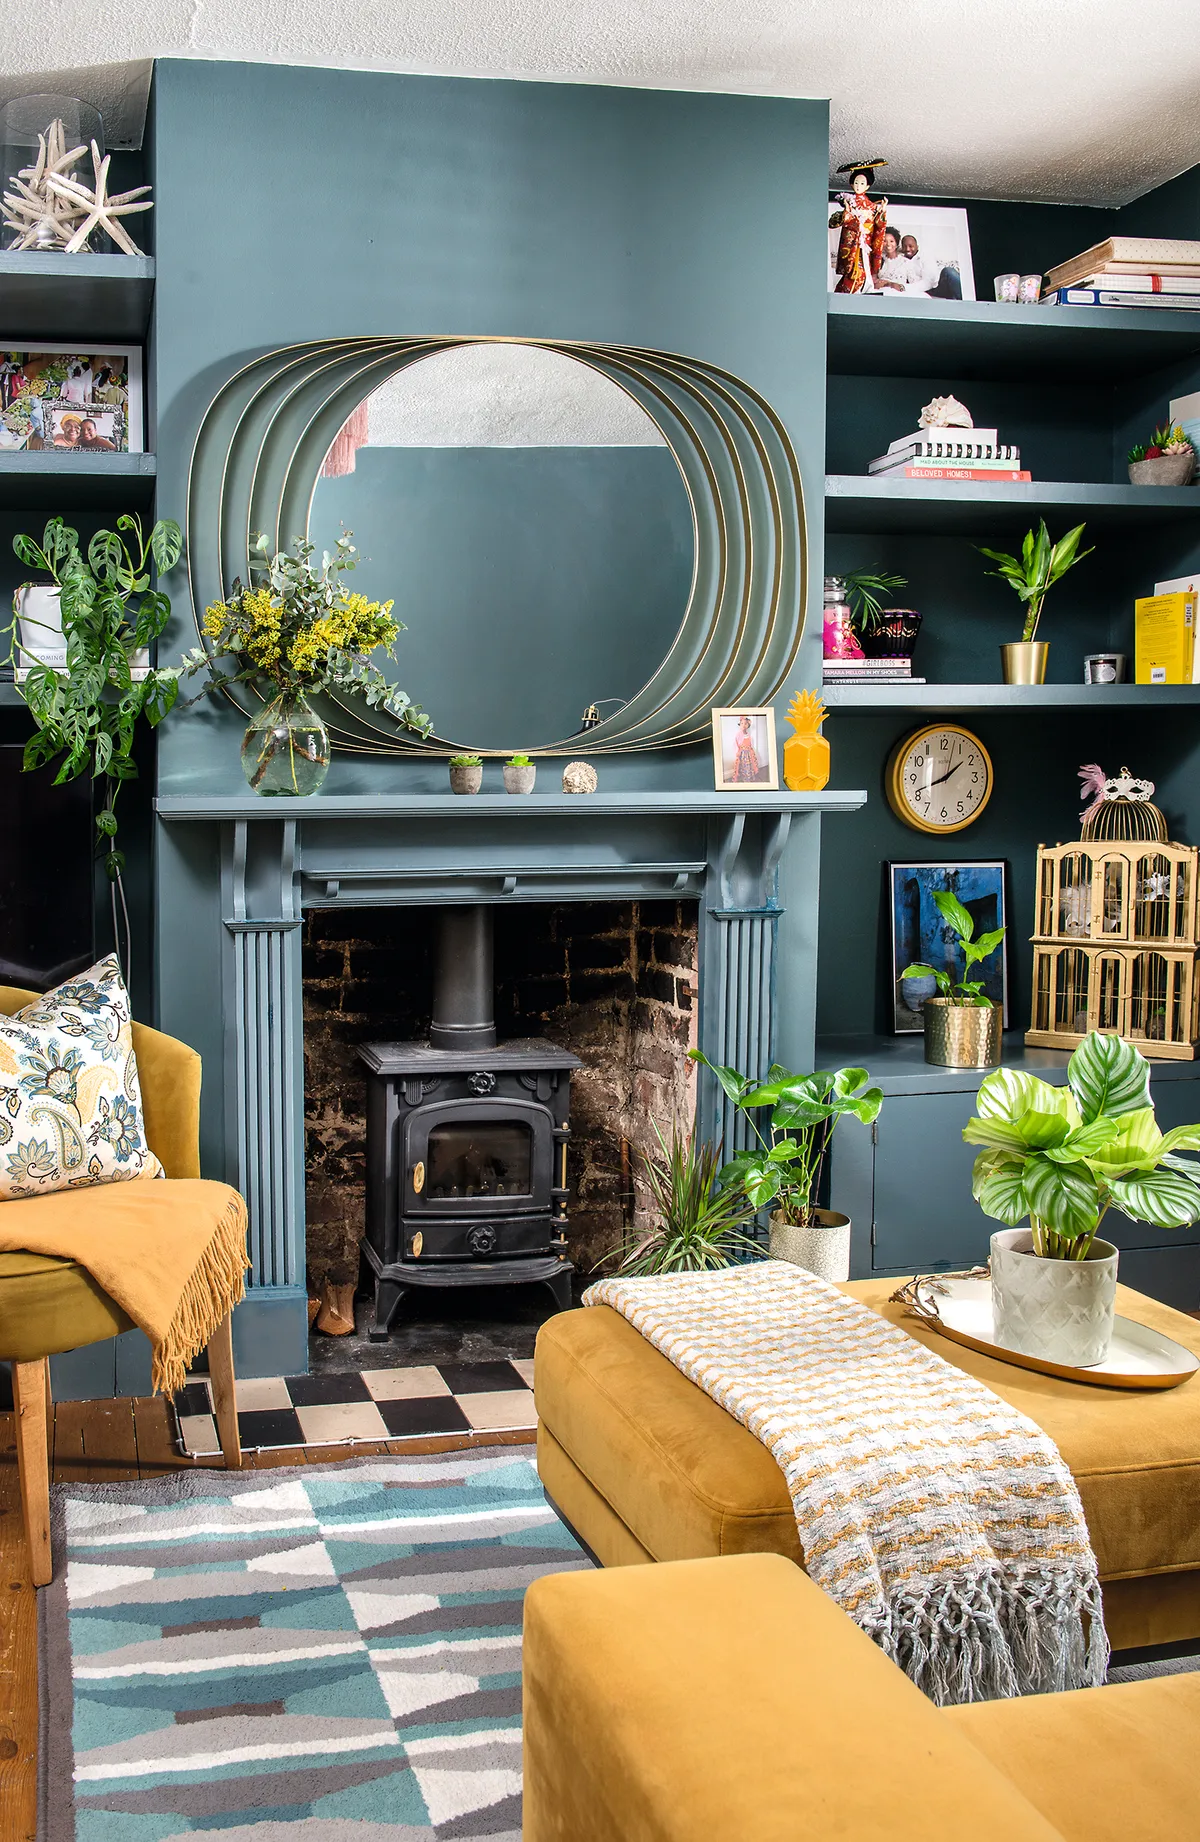 By being bold with colour and painting the walls and woodwork a moody blue, lifted with splashes of warm gold and yellow, Camellia has achieved the perfect balance of drama and homeliness